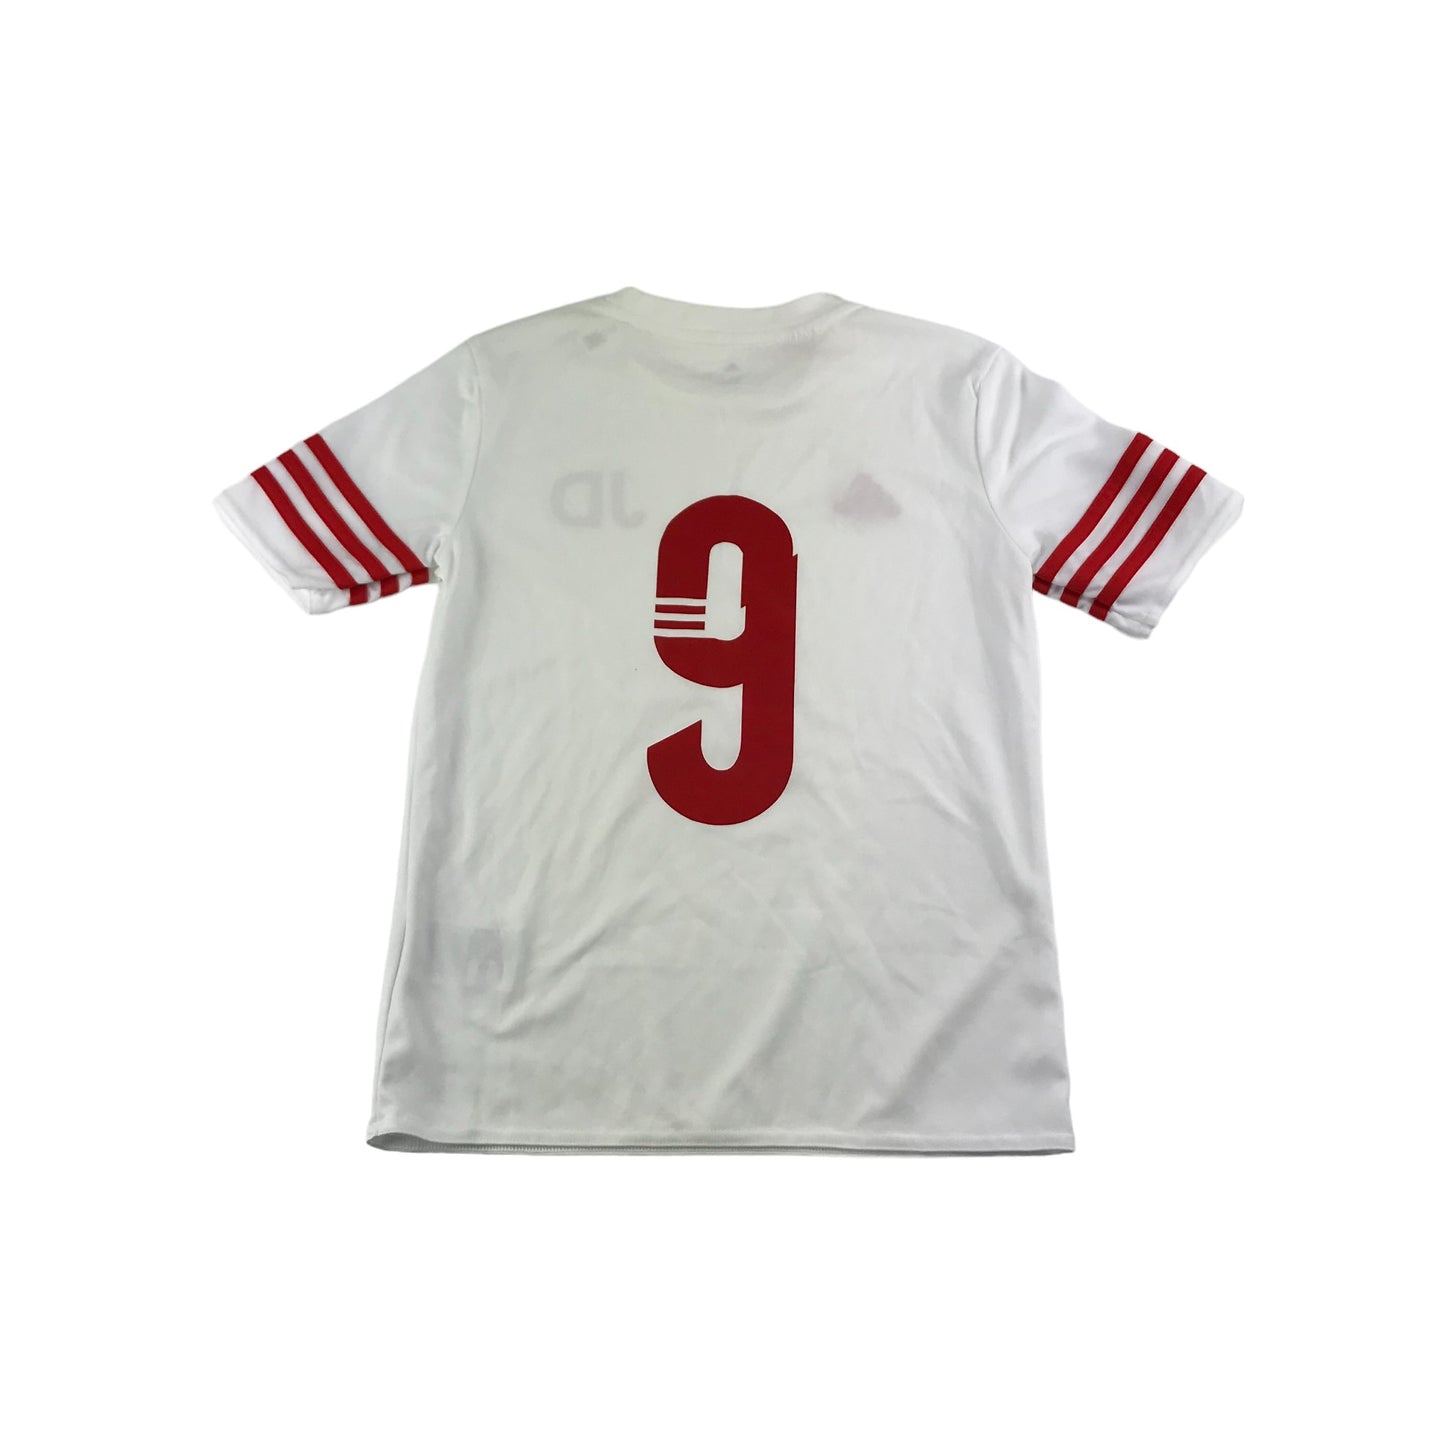 Adidas Football Strip Age 9 White Number 9 JD Sports Top